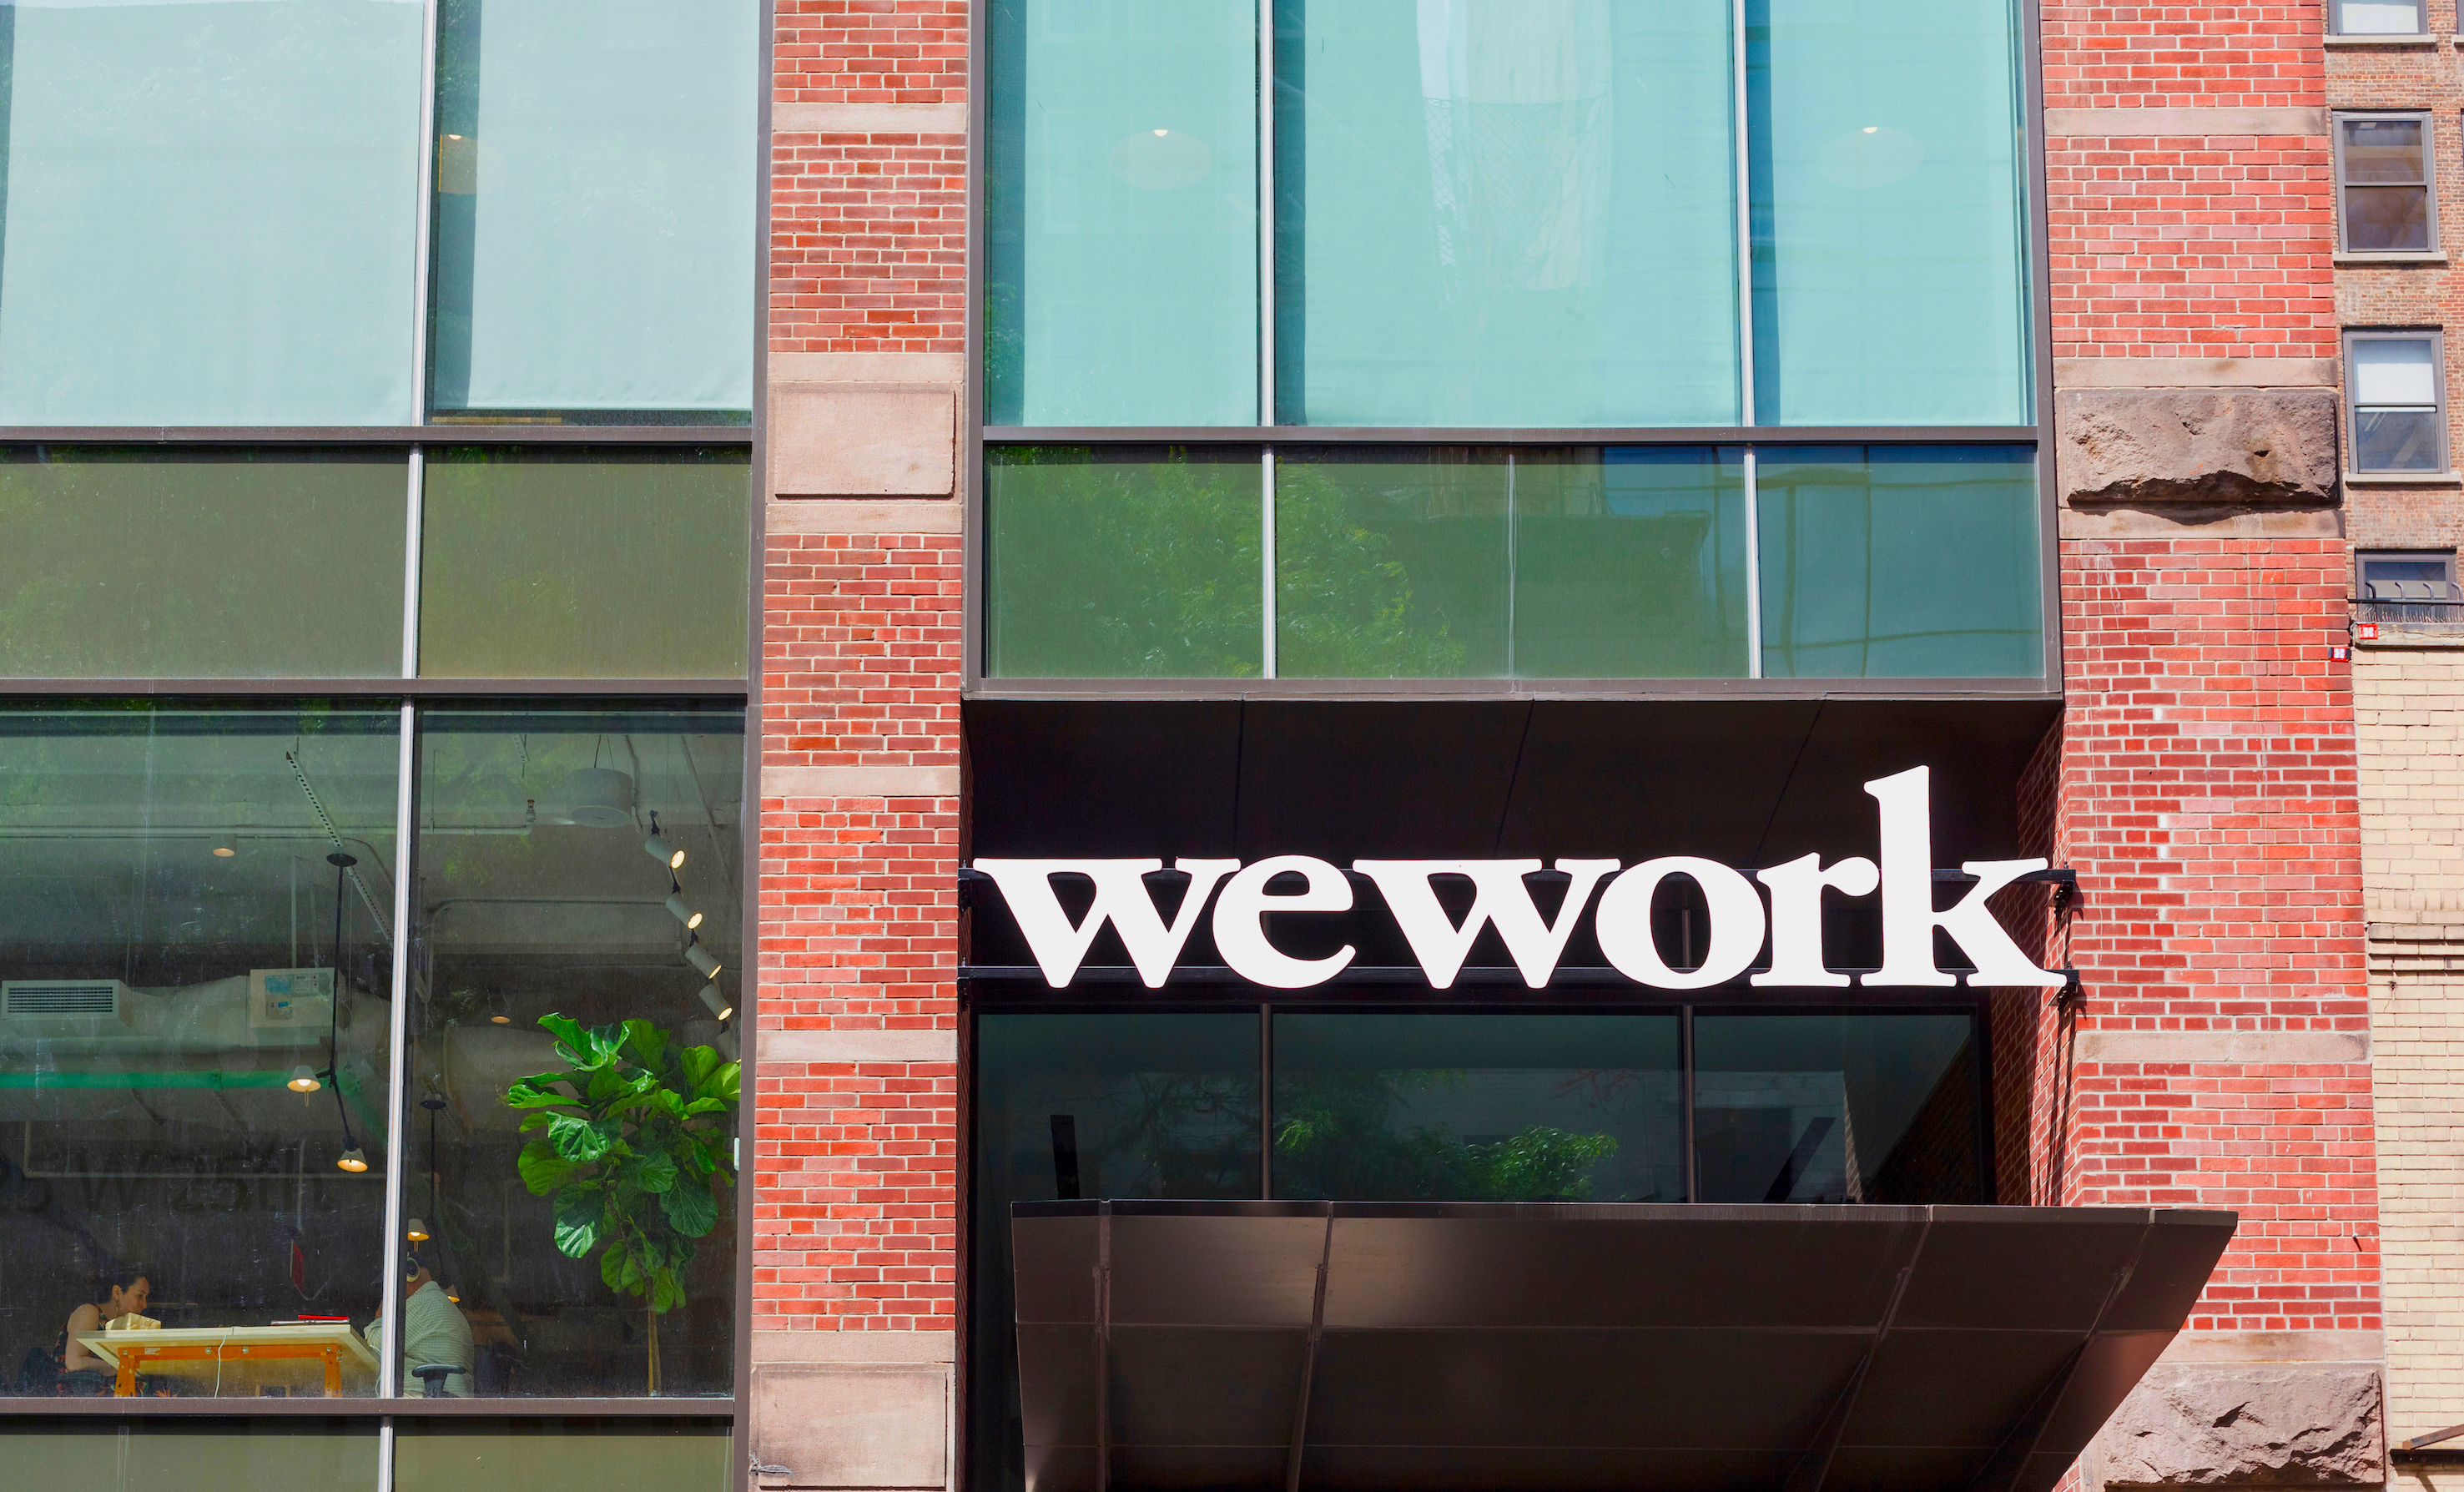 wework office space_05302019